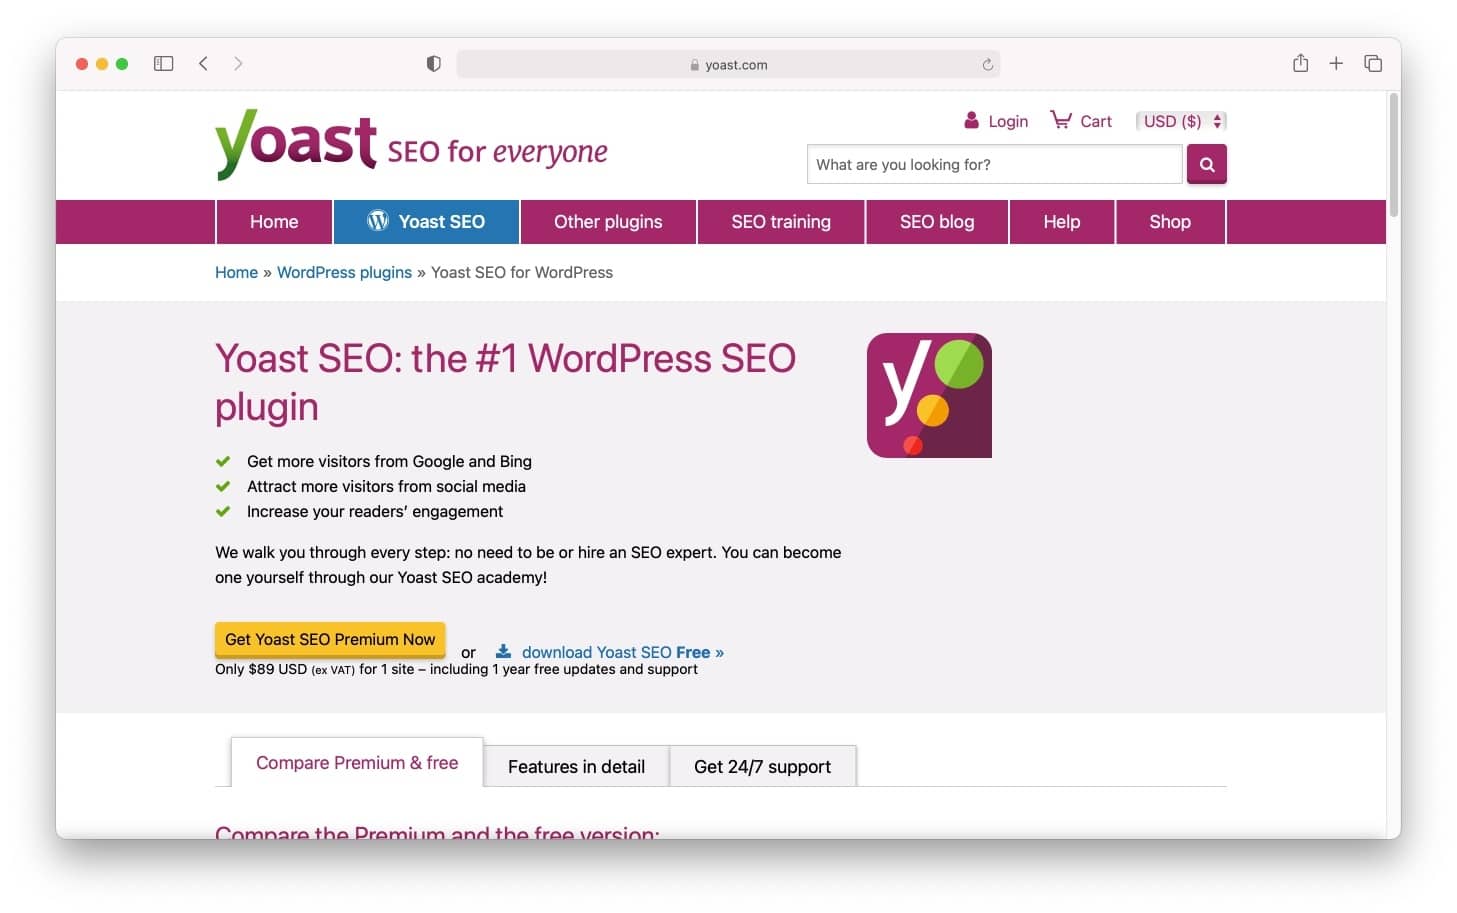 One of the most well-known SEO tools for WordPress: Yoast